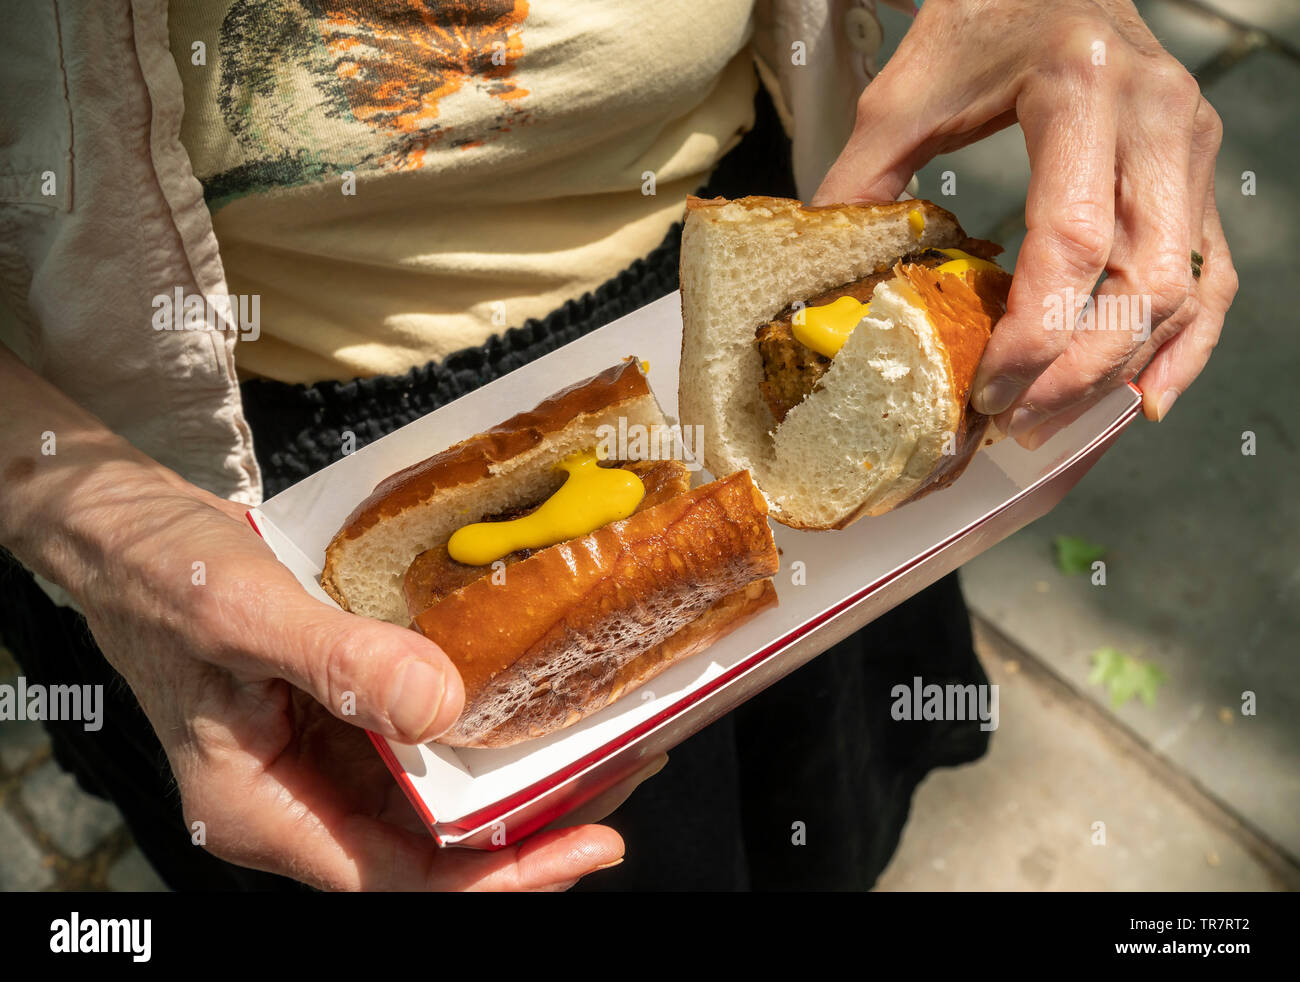 A foodie with her lunch of Beyond Meat brand Beyond Sausage at a promotional event in New York on Thursday, May 24, 2019. The plant-based protein start-up Beyond Meat recently had its initial public offering. (© Richard B. Levine) Stock Photo